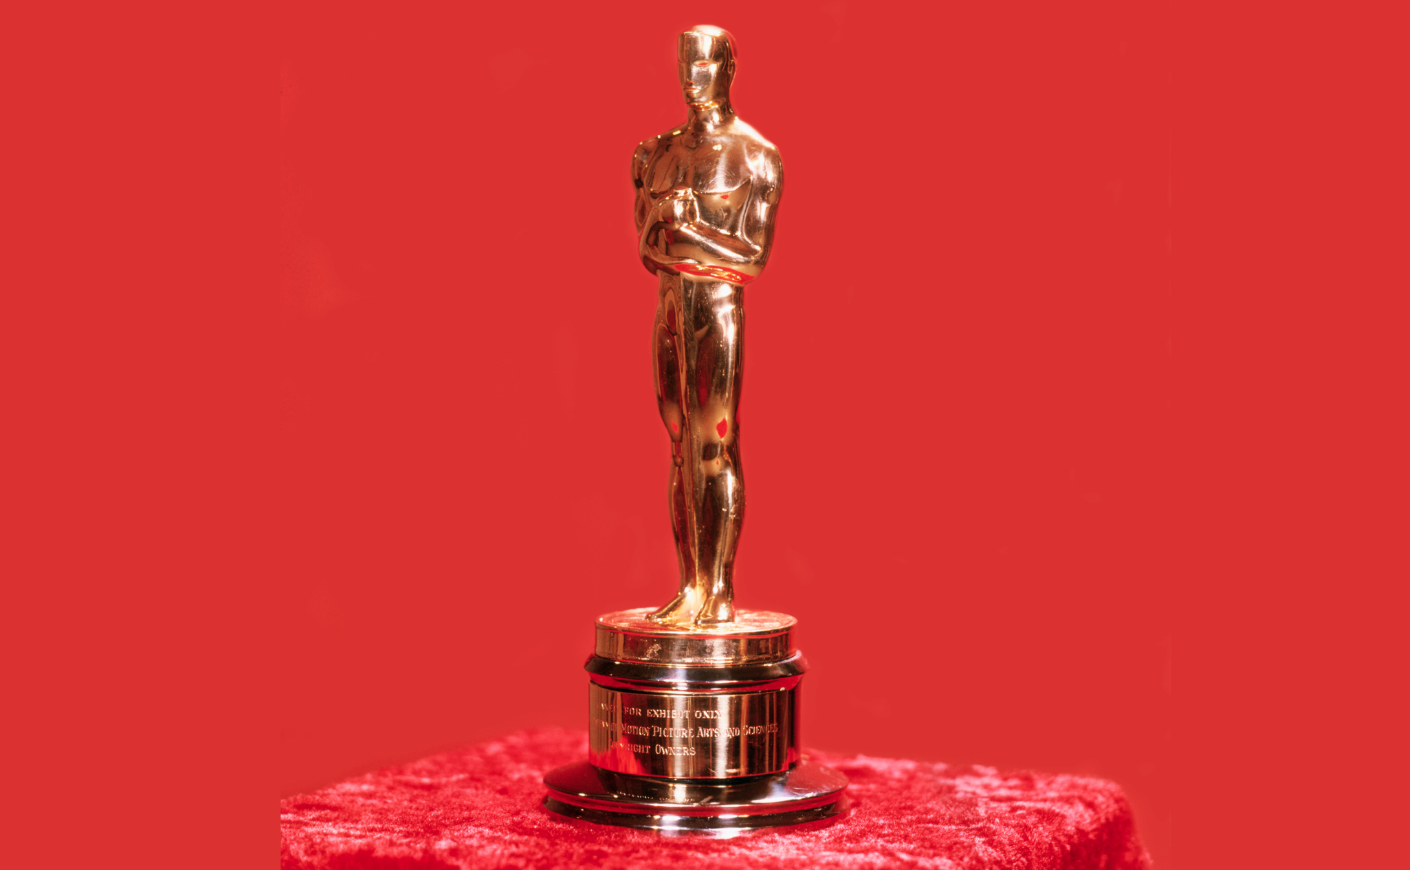 A trophy from the Academy Awards